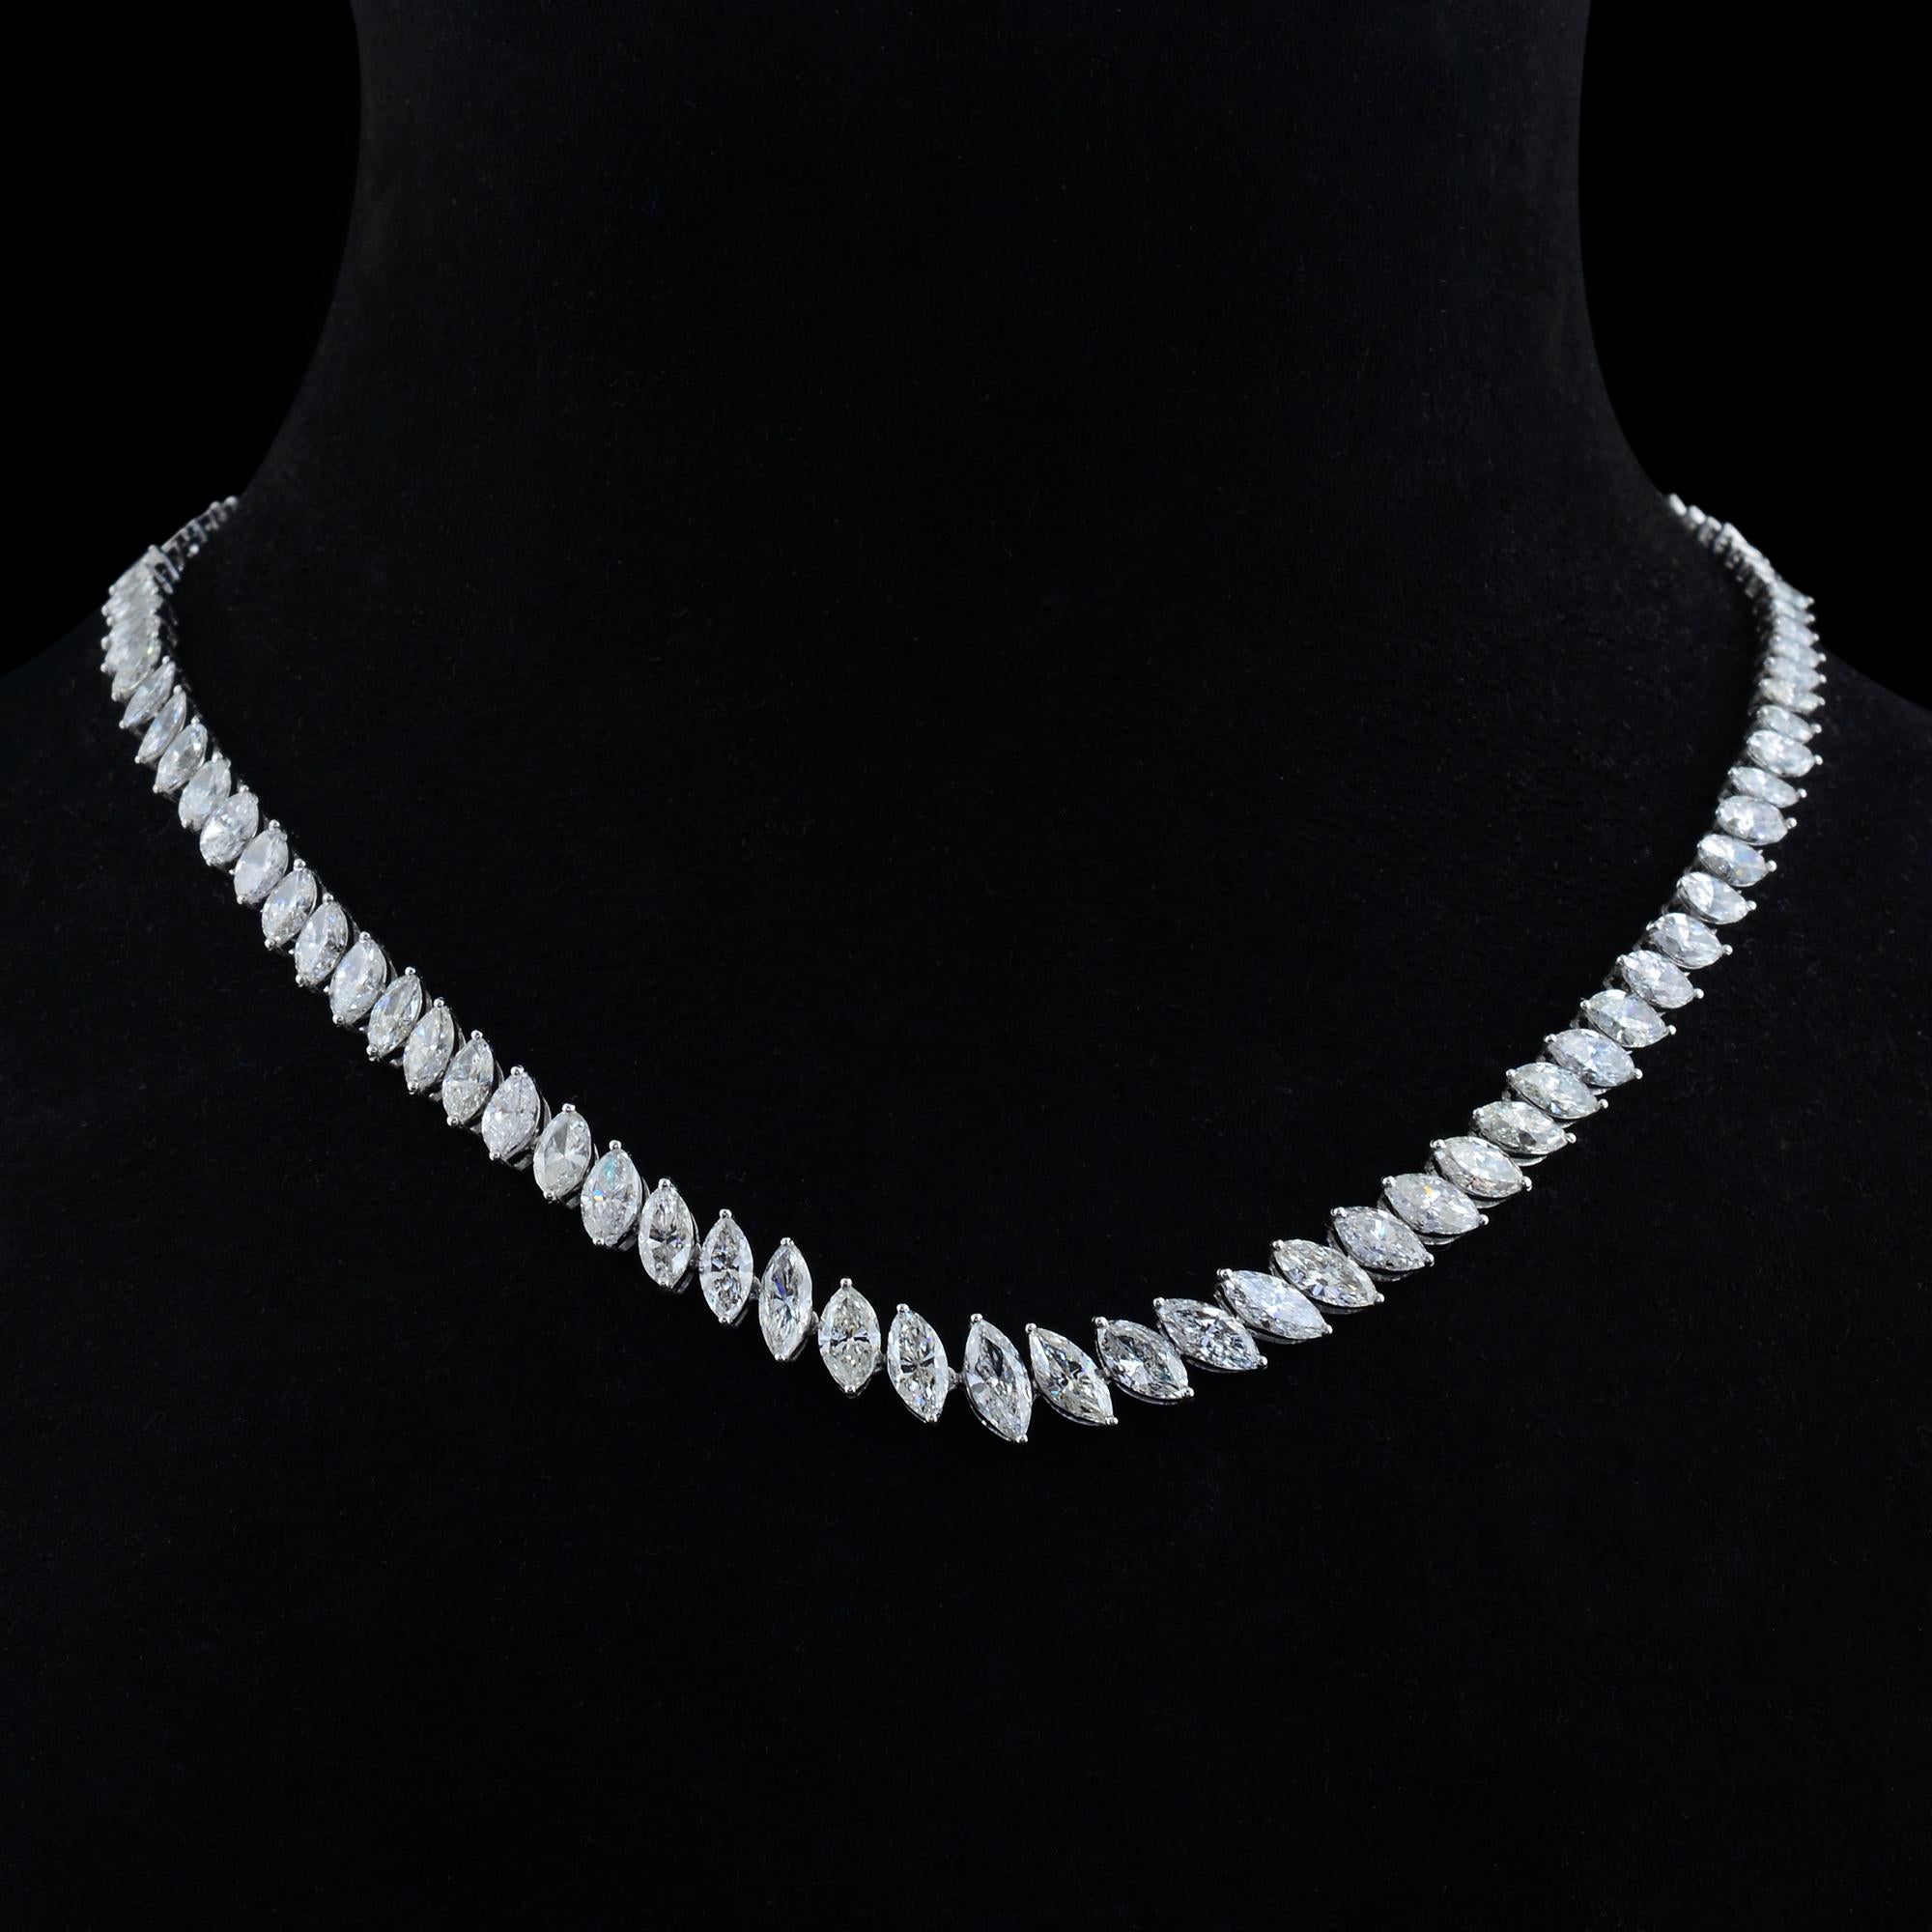 Modern 12.60 Carat SI Clarity HI Color Marquise Diamond Necklace 18 Karat White Gold For Sale